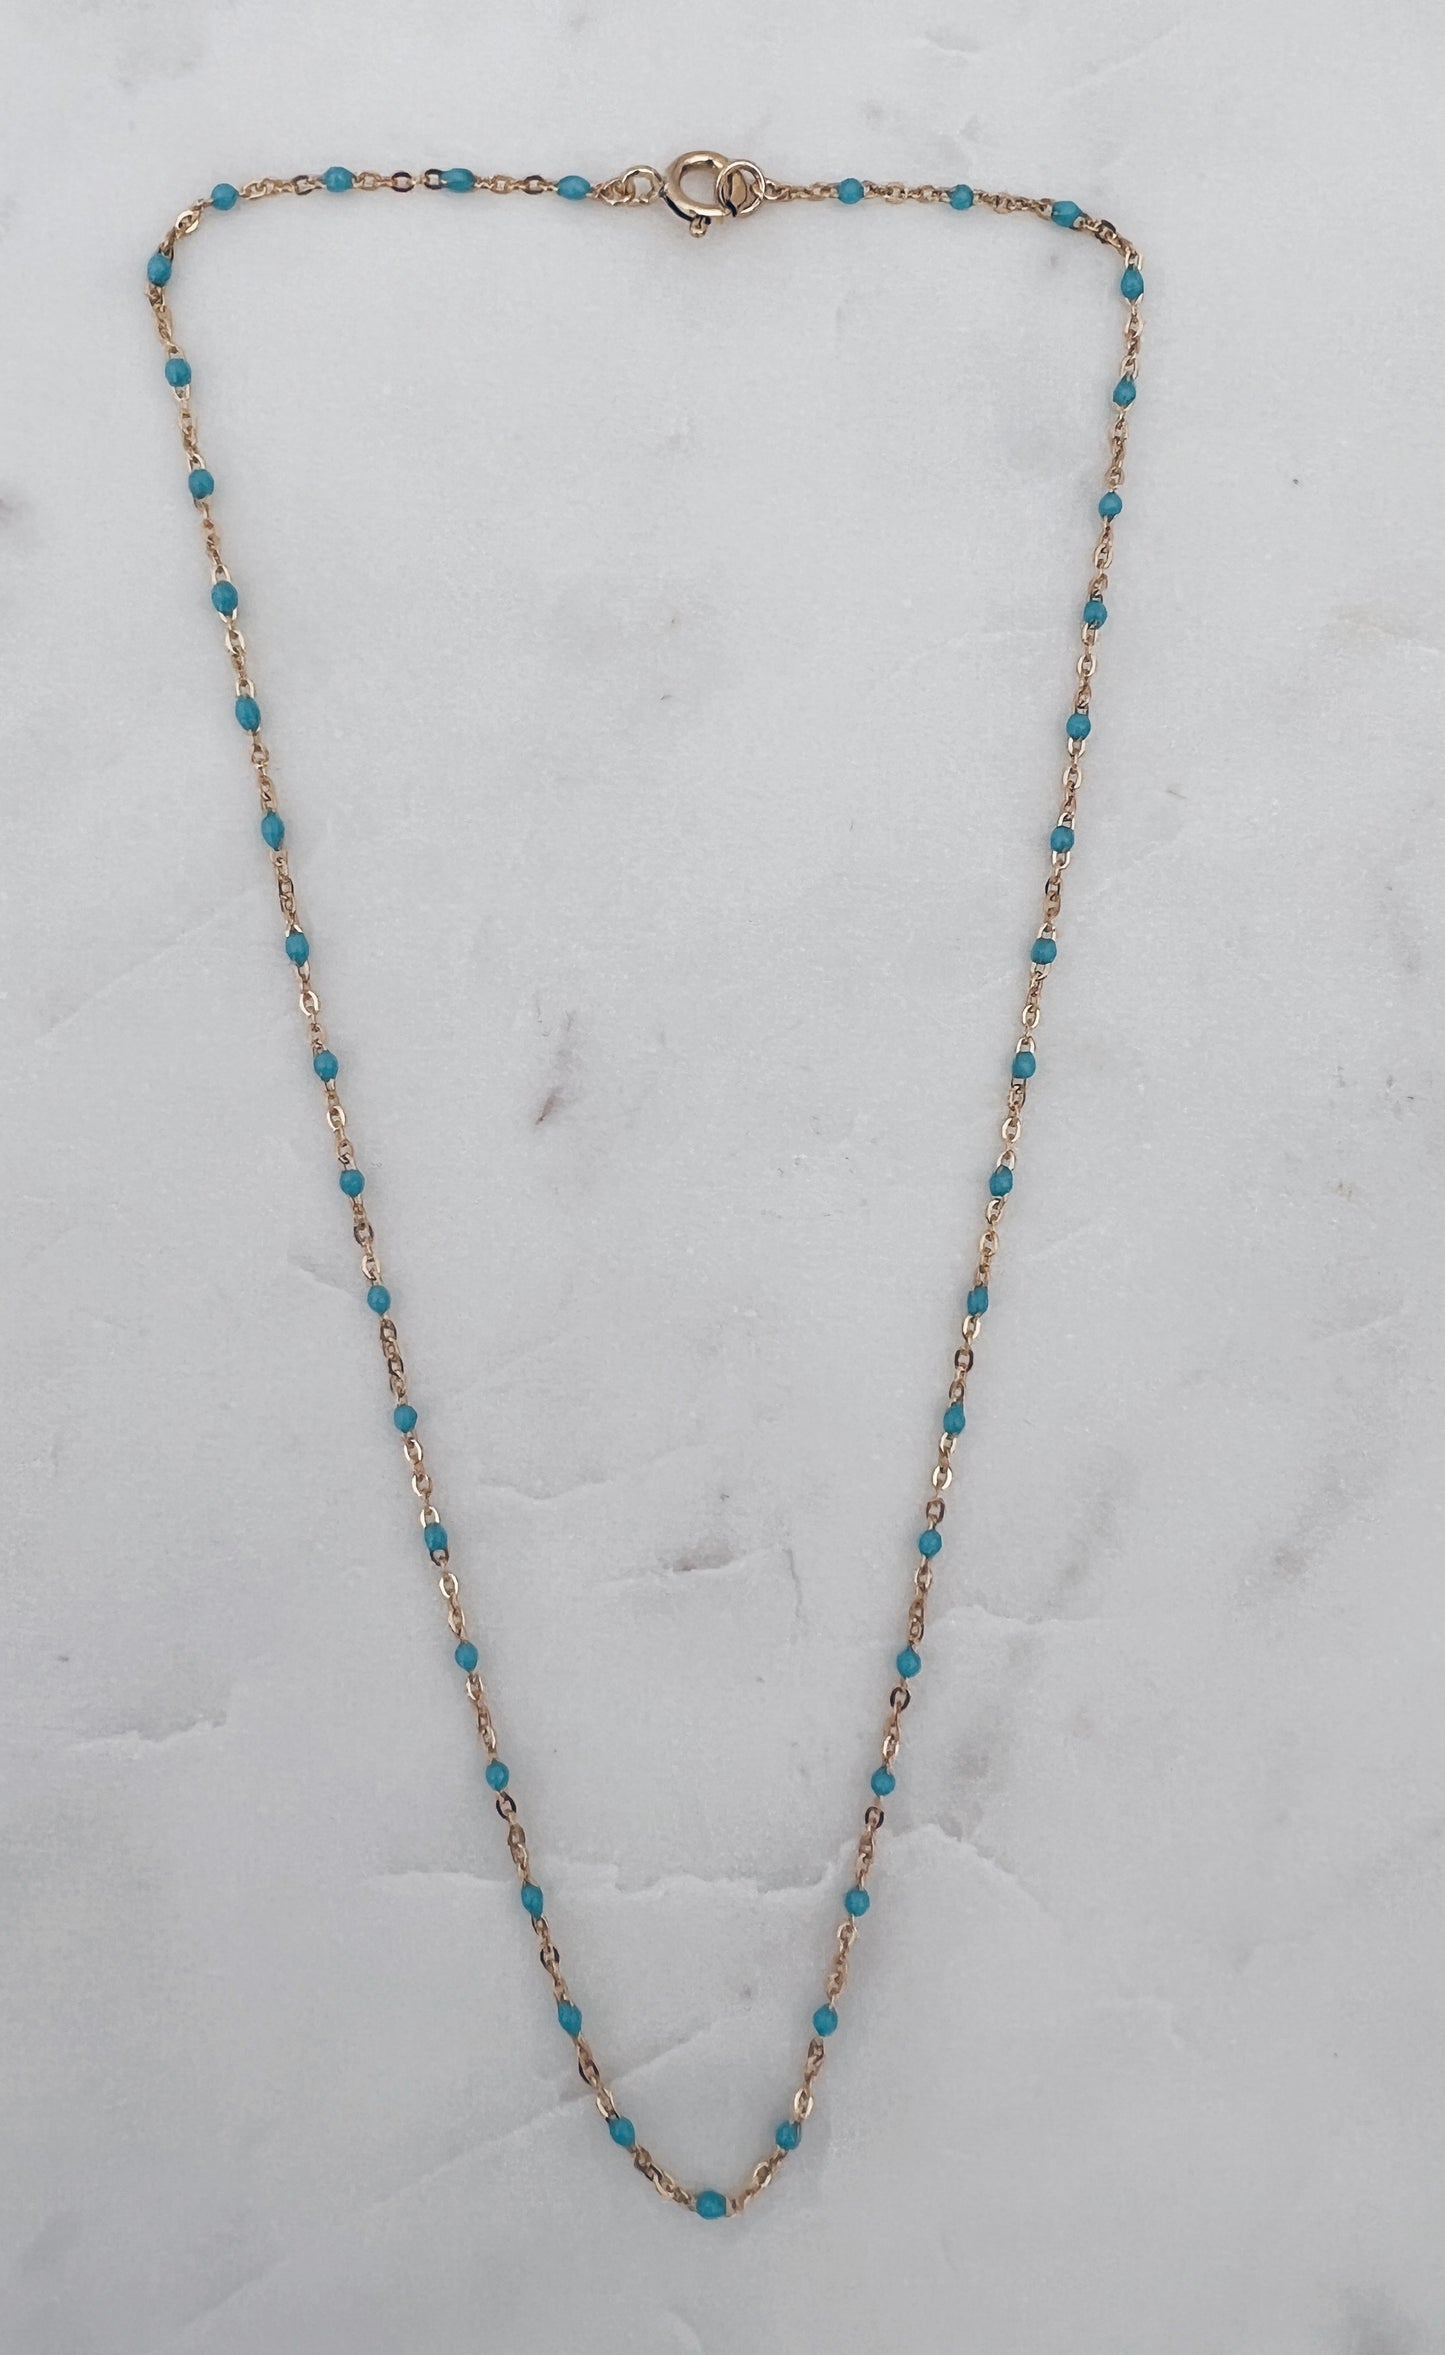 14k Gold Filled Dotted Enamel Bead Necklace + More Colors